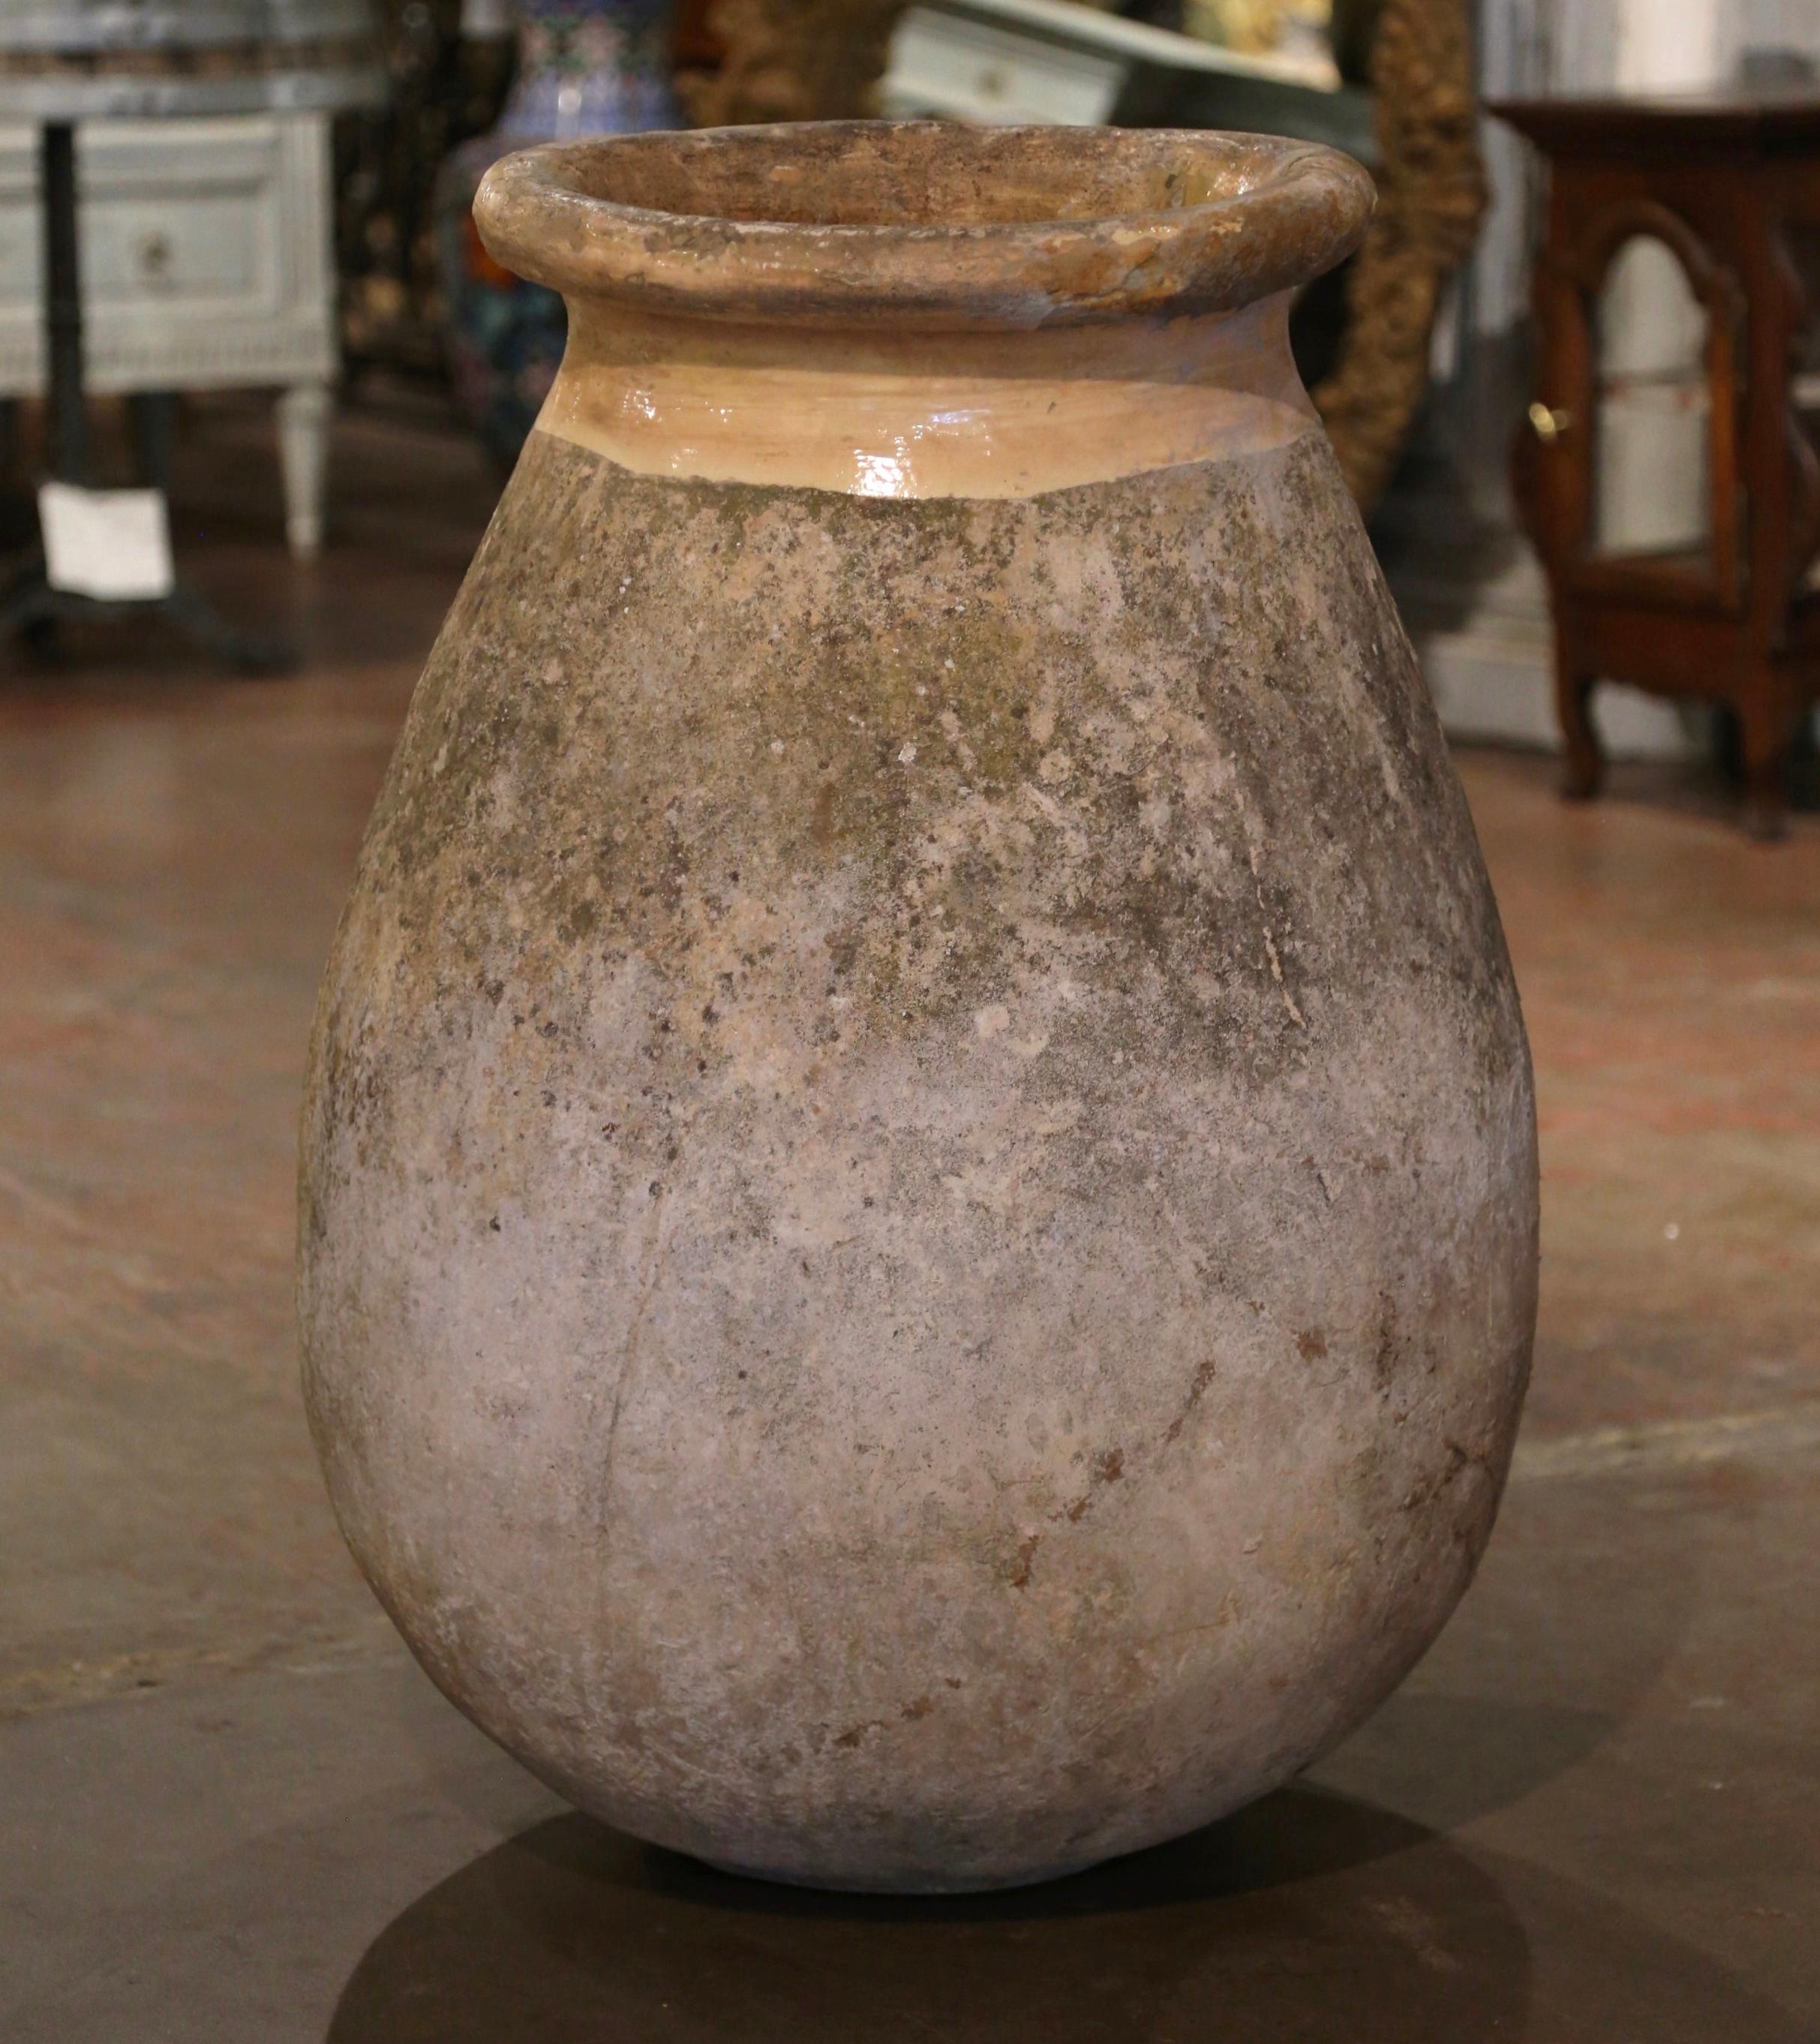 This large, antique earthenware olive oil jar was created in Biot, Provence, Southern France, circa 1760. Made of blond clay and neutral in color, the terracotta vase has a traditional round bulbous shape. The rustic, time-worn pot features a pale